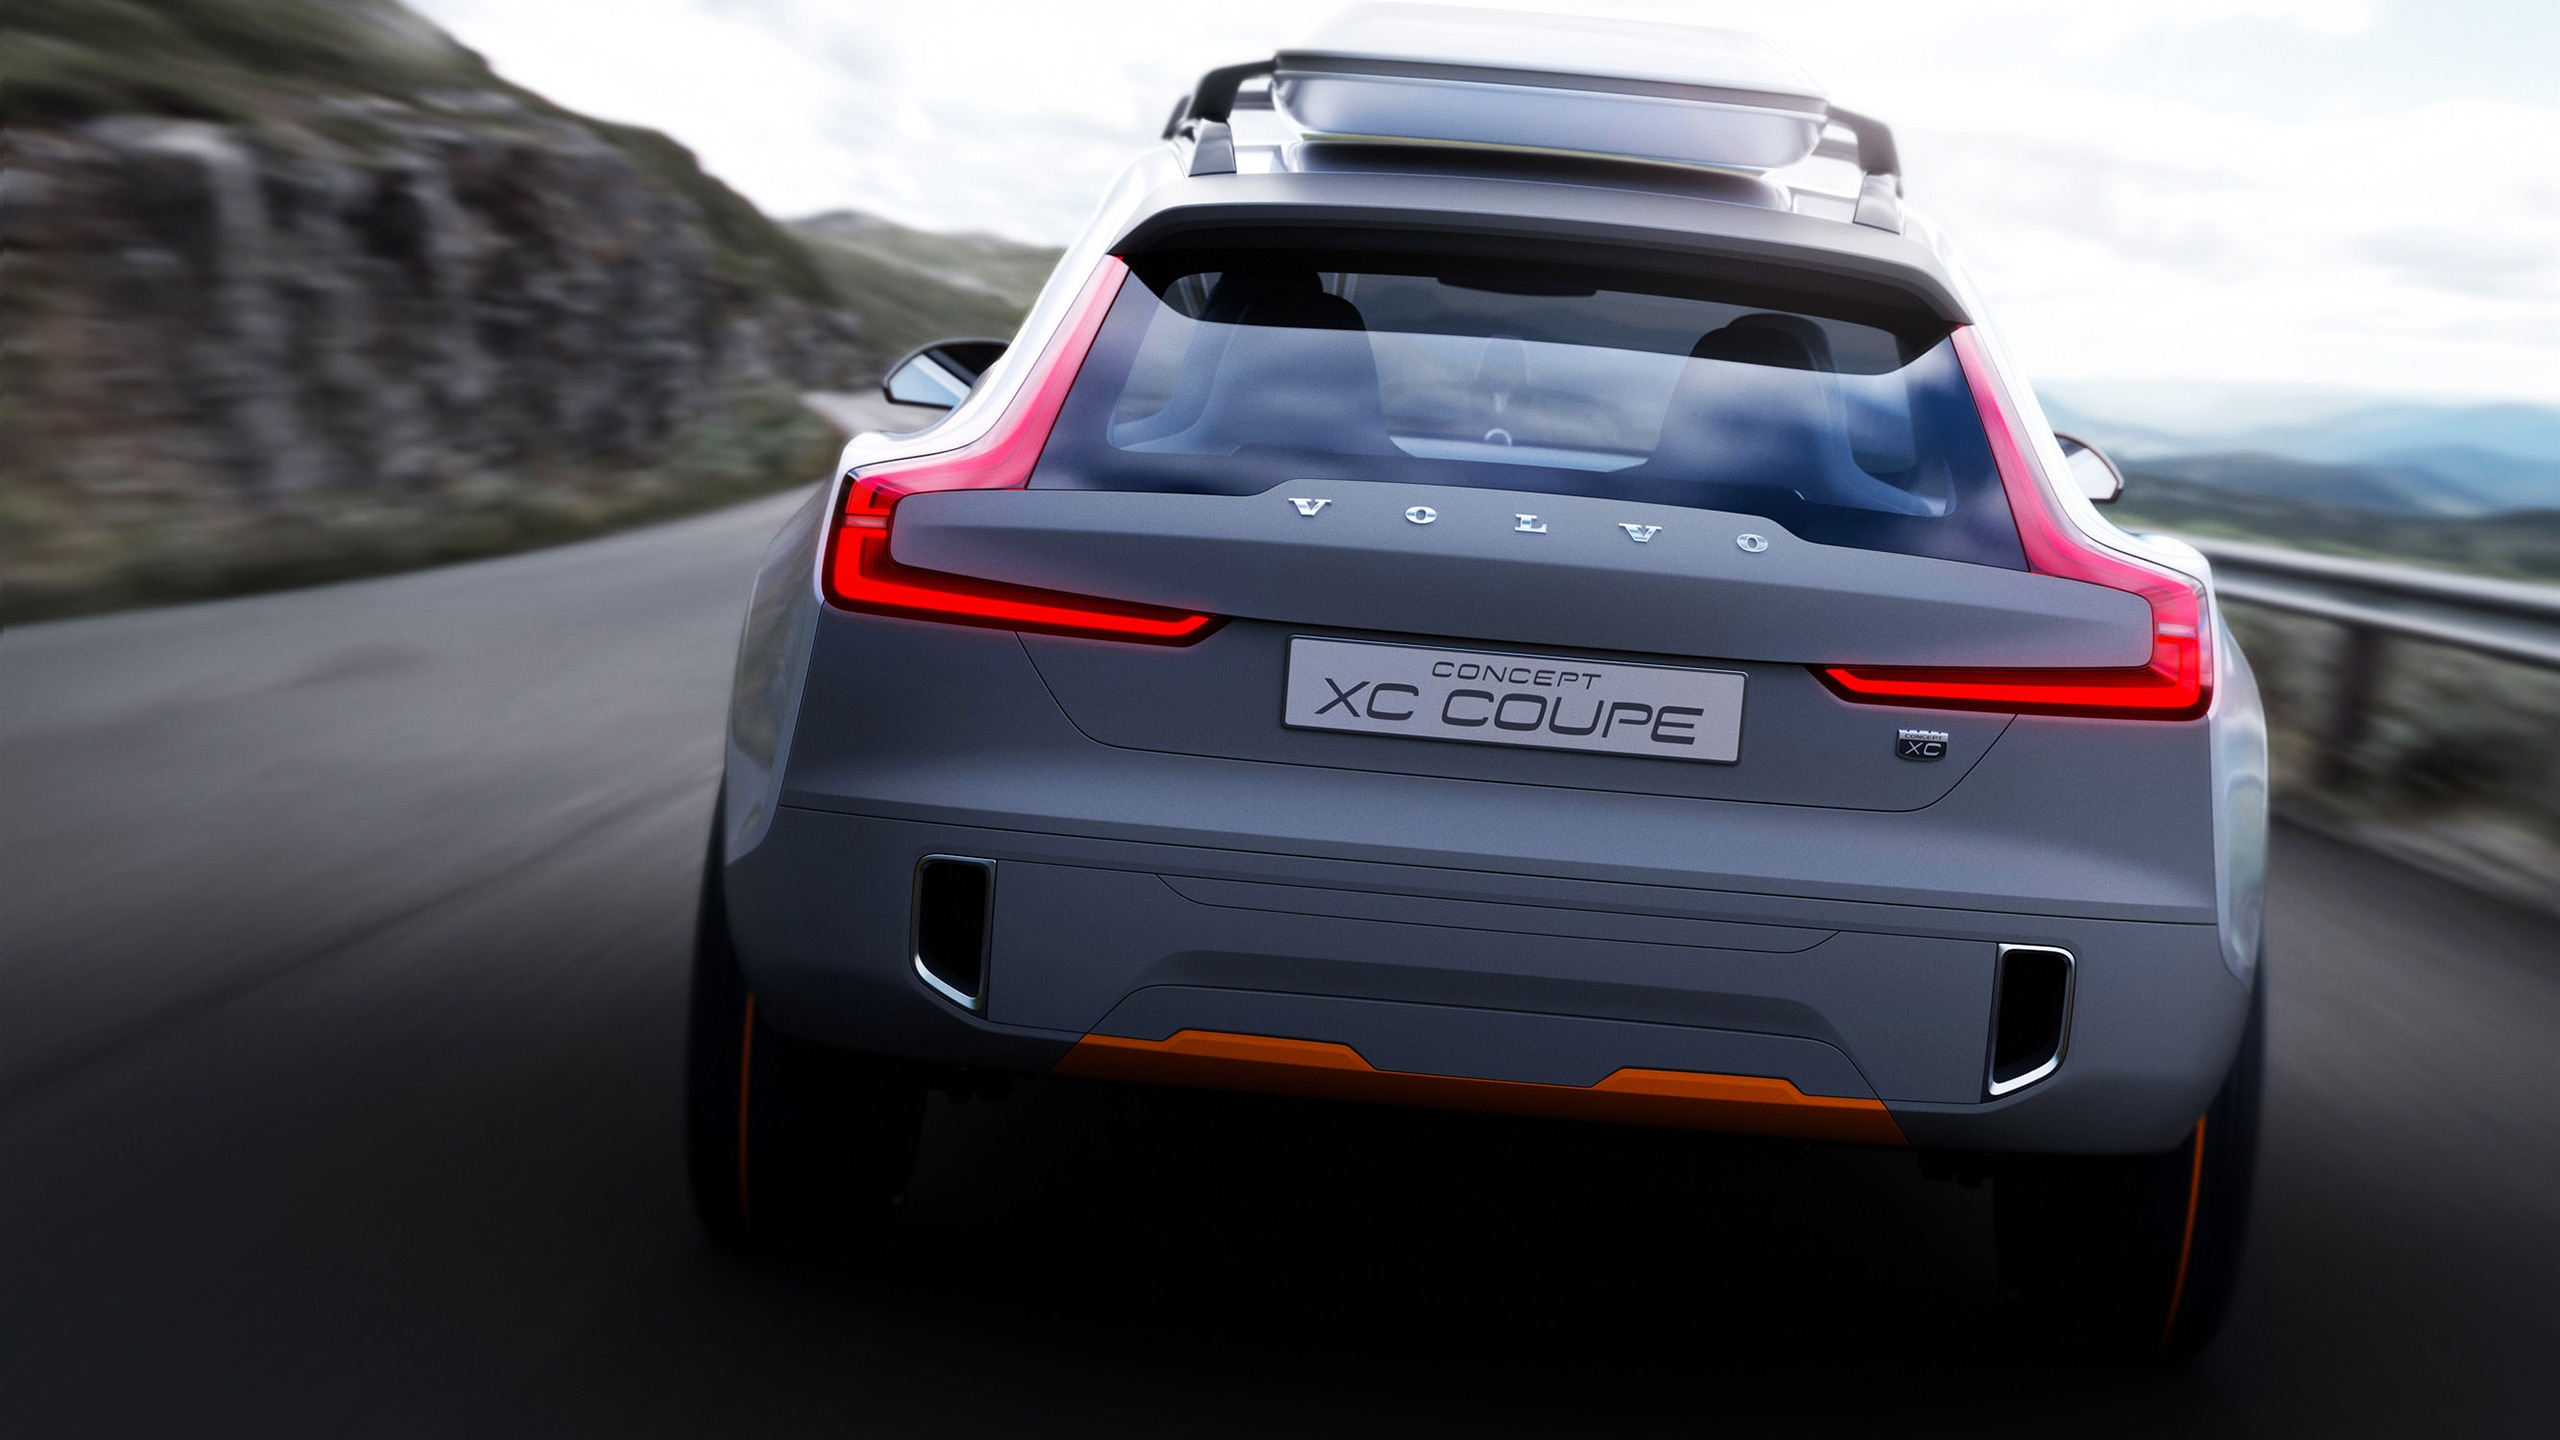 Amazing Volvo Concept XC Coupe for 2560x1440 HDTV resolution